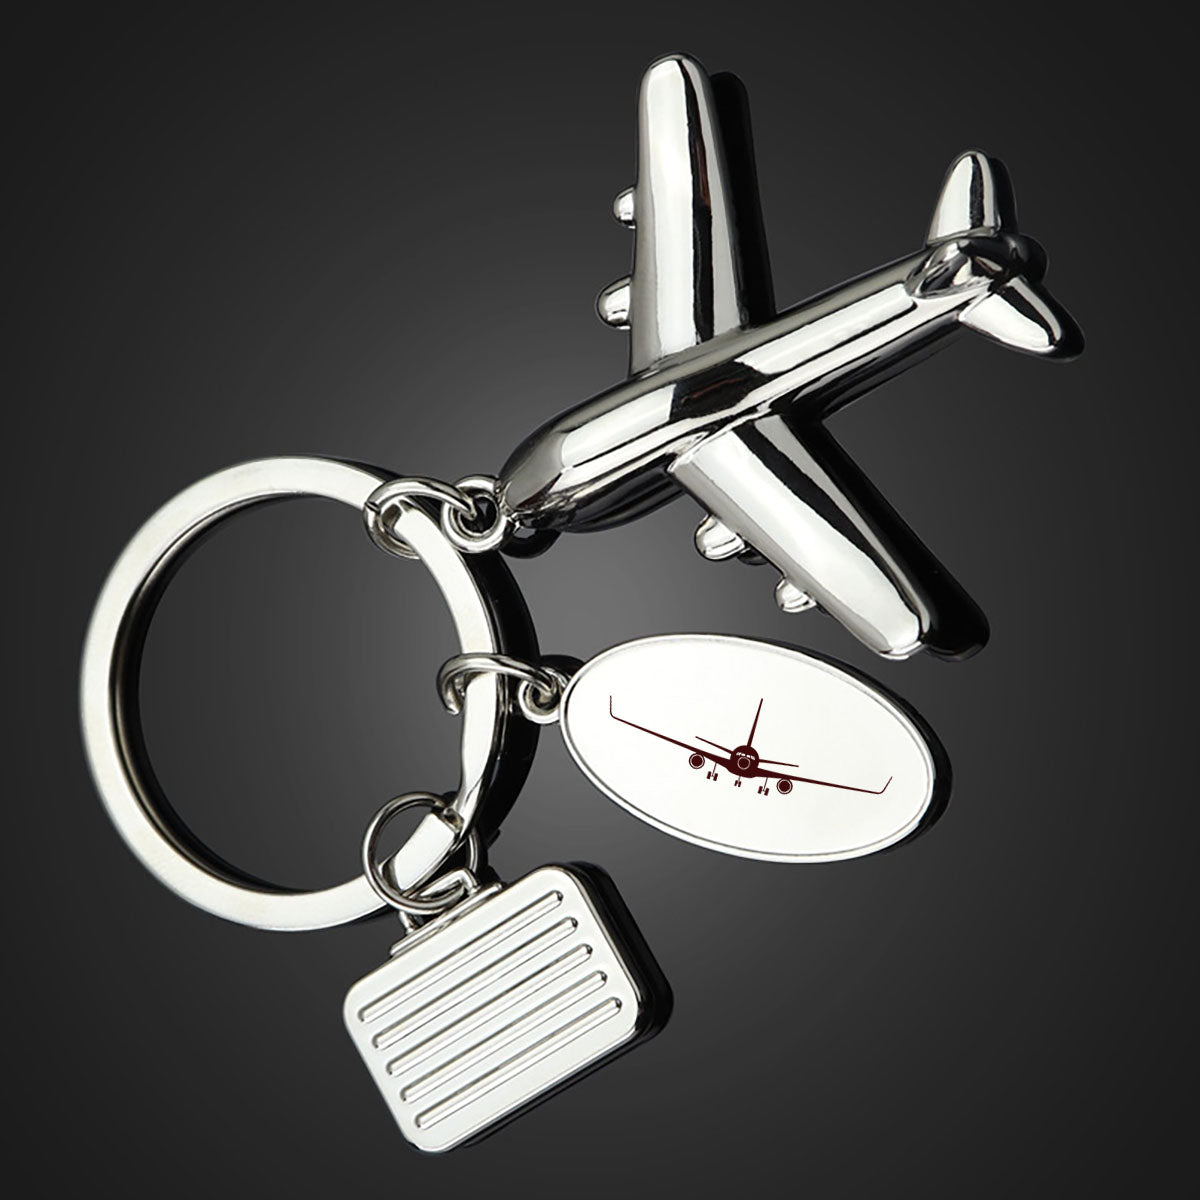 Boeing 767 Silhouette Designed Suitcase Airplane Key Chains